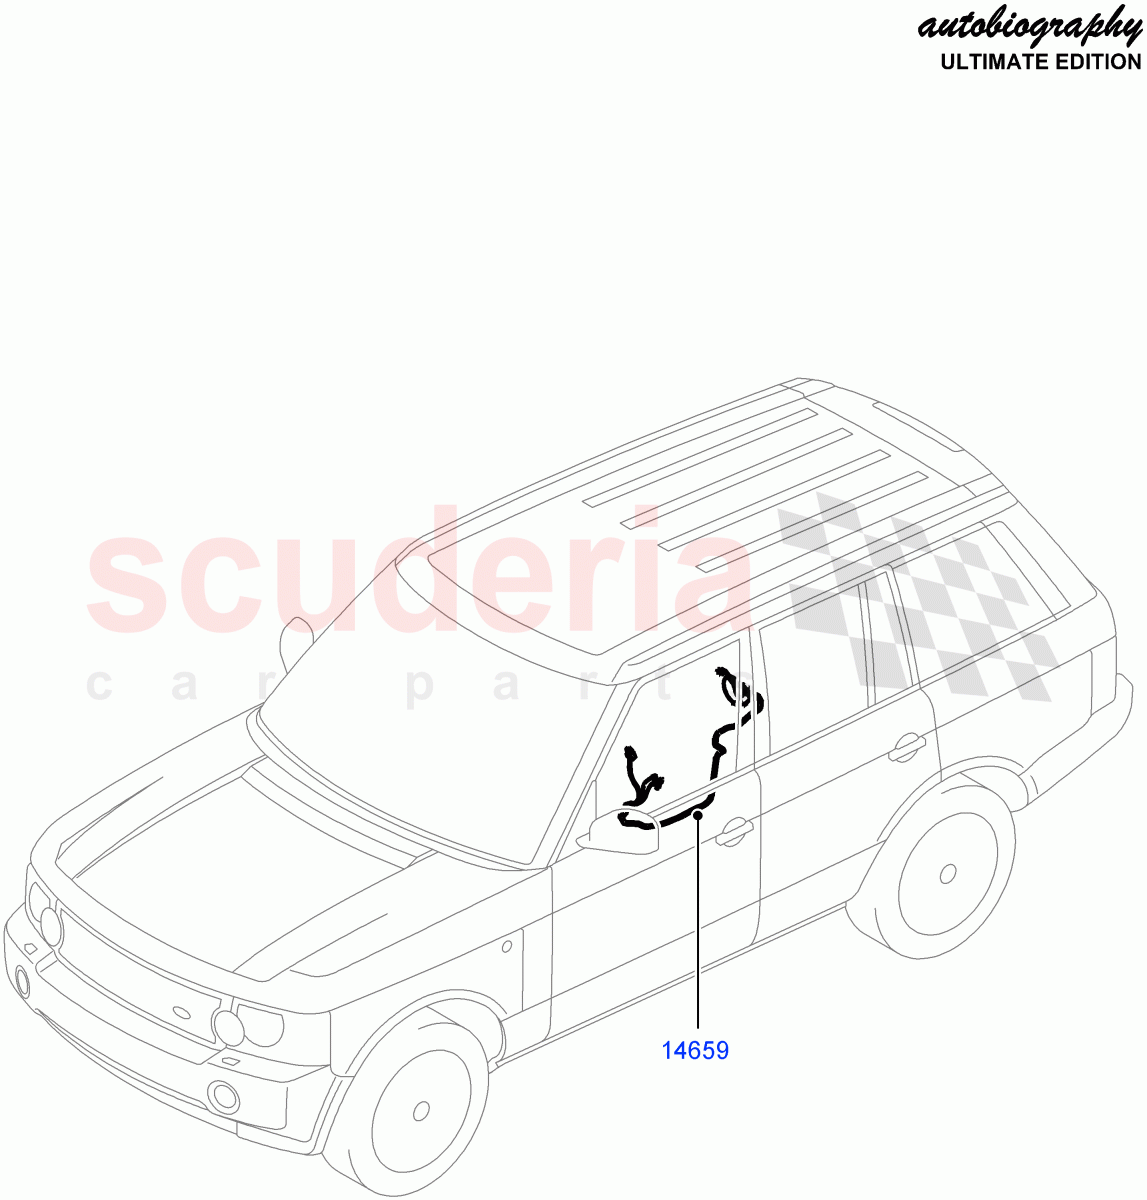 Wiring - Seats(Autobiography Ultimate Edition)((V)FROMBA344356) of Land Rover Land Rover Range Rover (2010-2012) [5.0 OHC SGDI NA V8 Petrol]